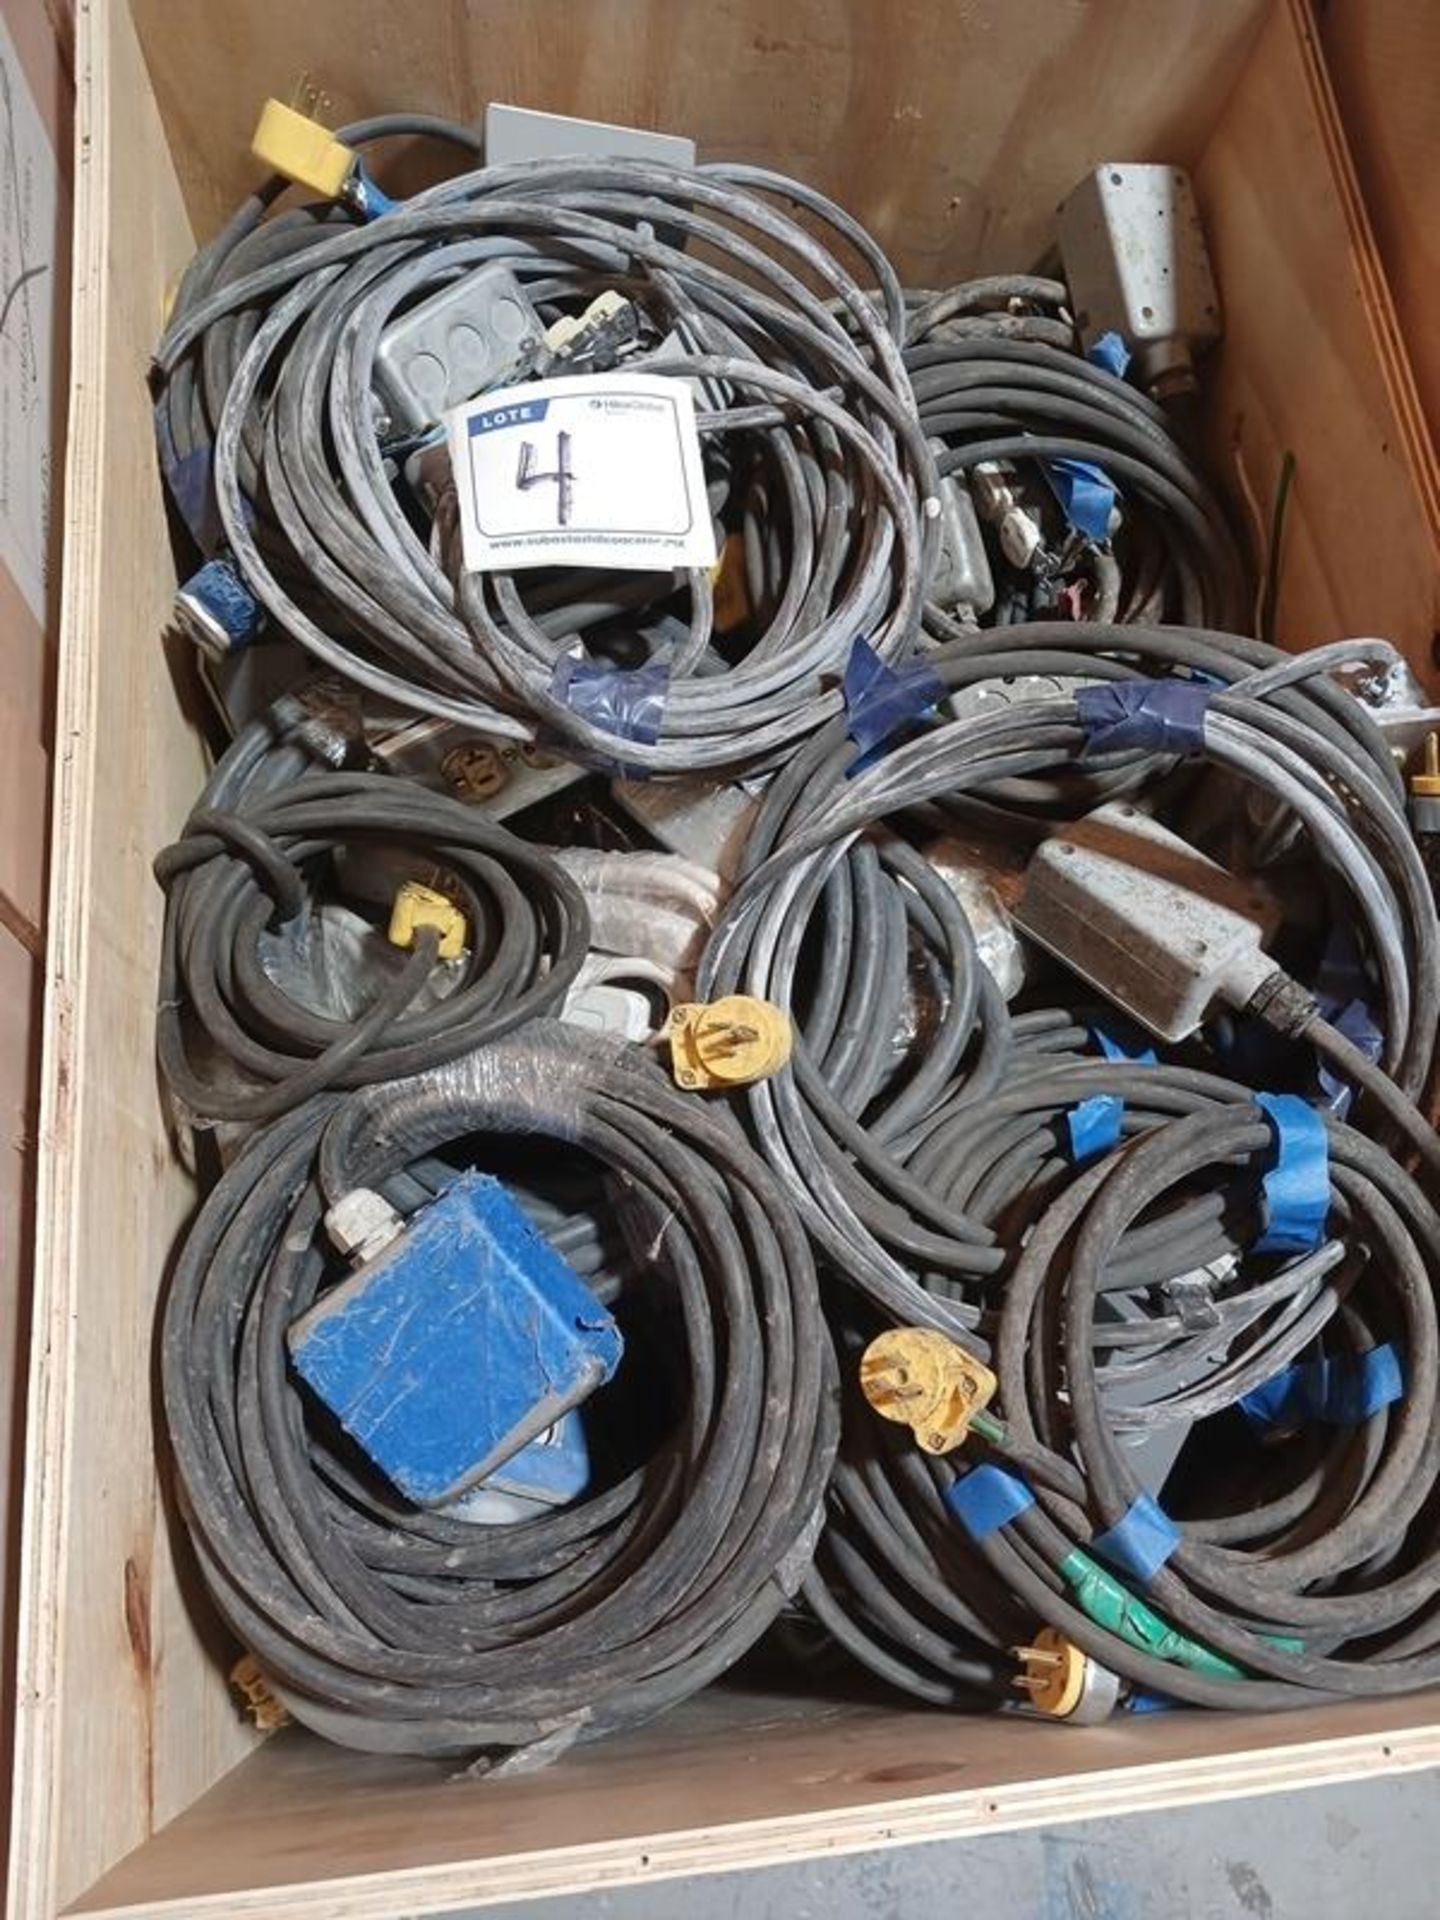 LOT OF EXTENSIONS AND ELECTRICAL CABLES - Image 4 of 7